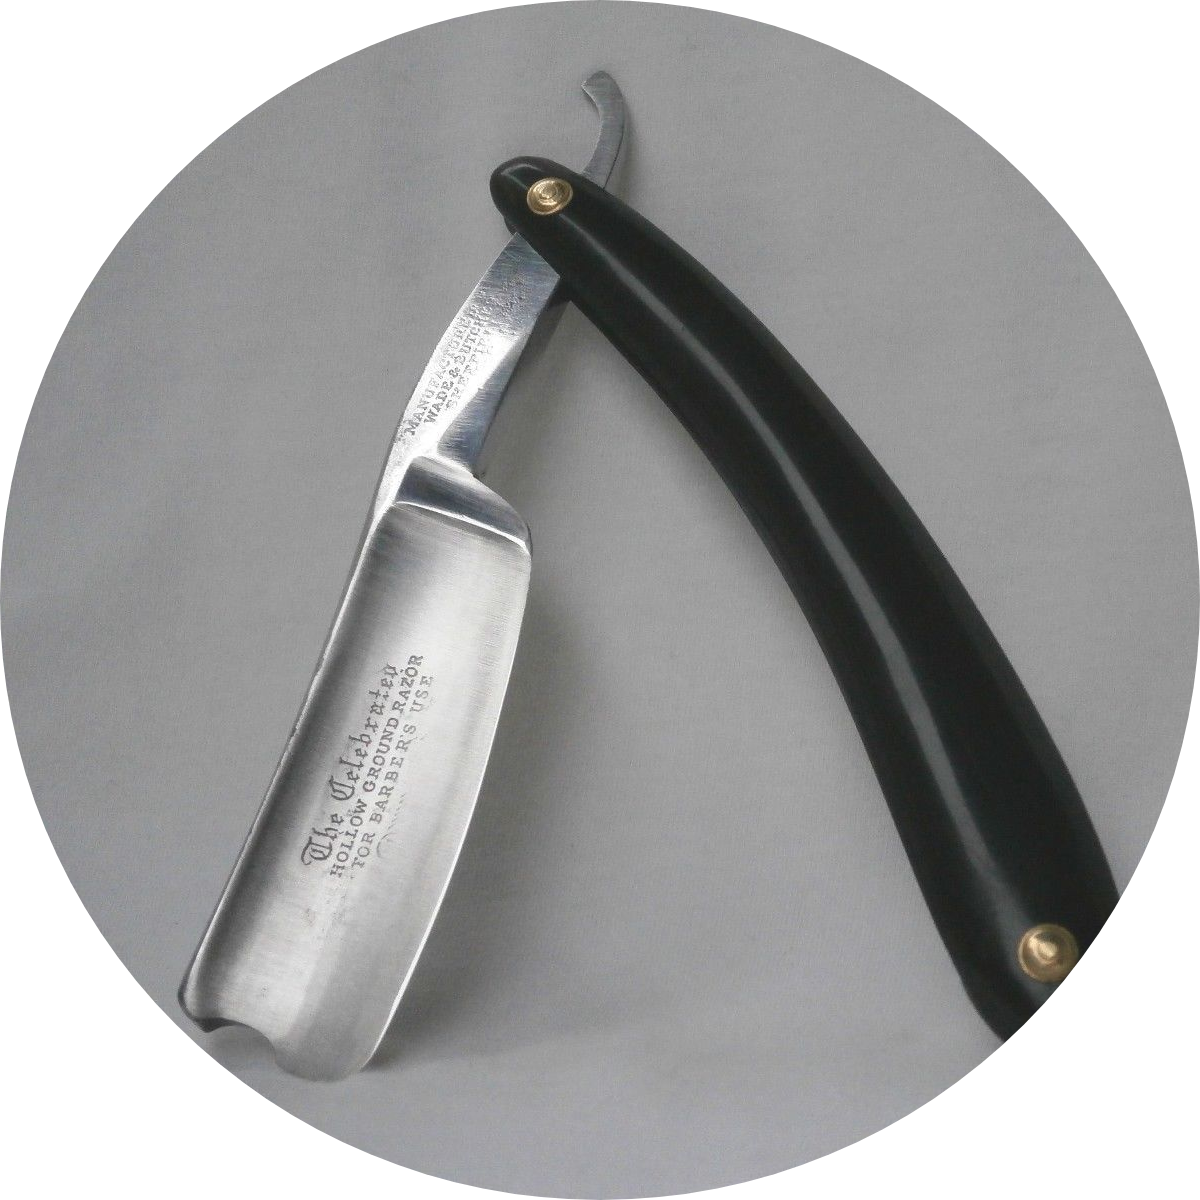 How to choose a straight razor